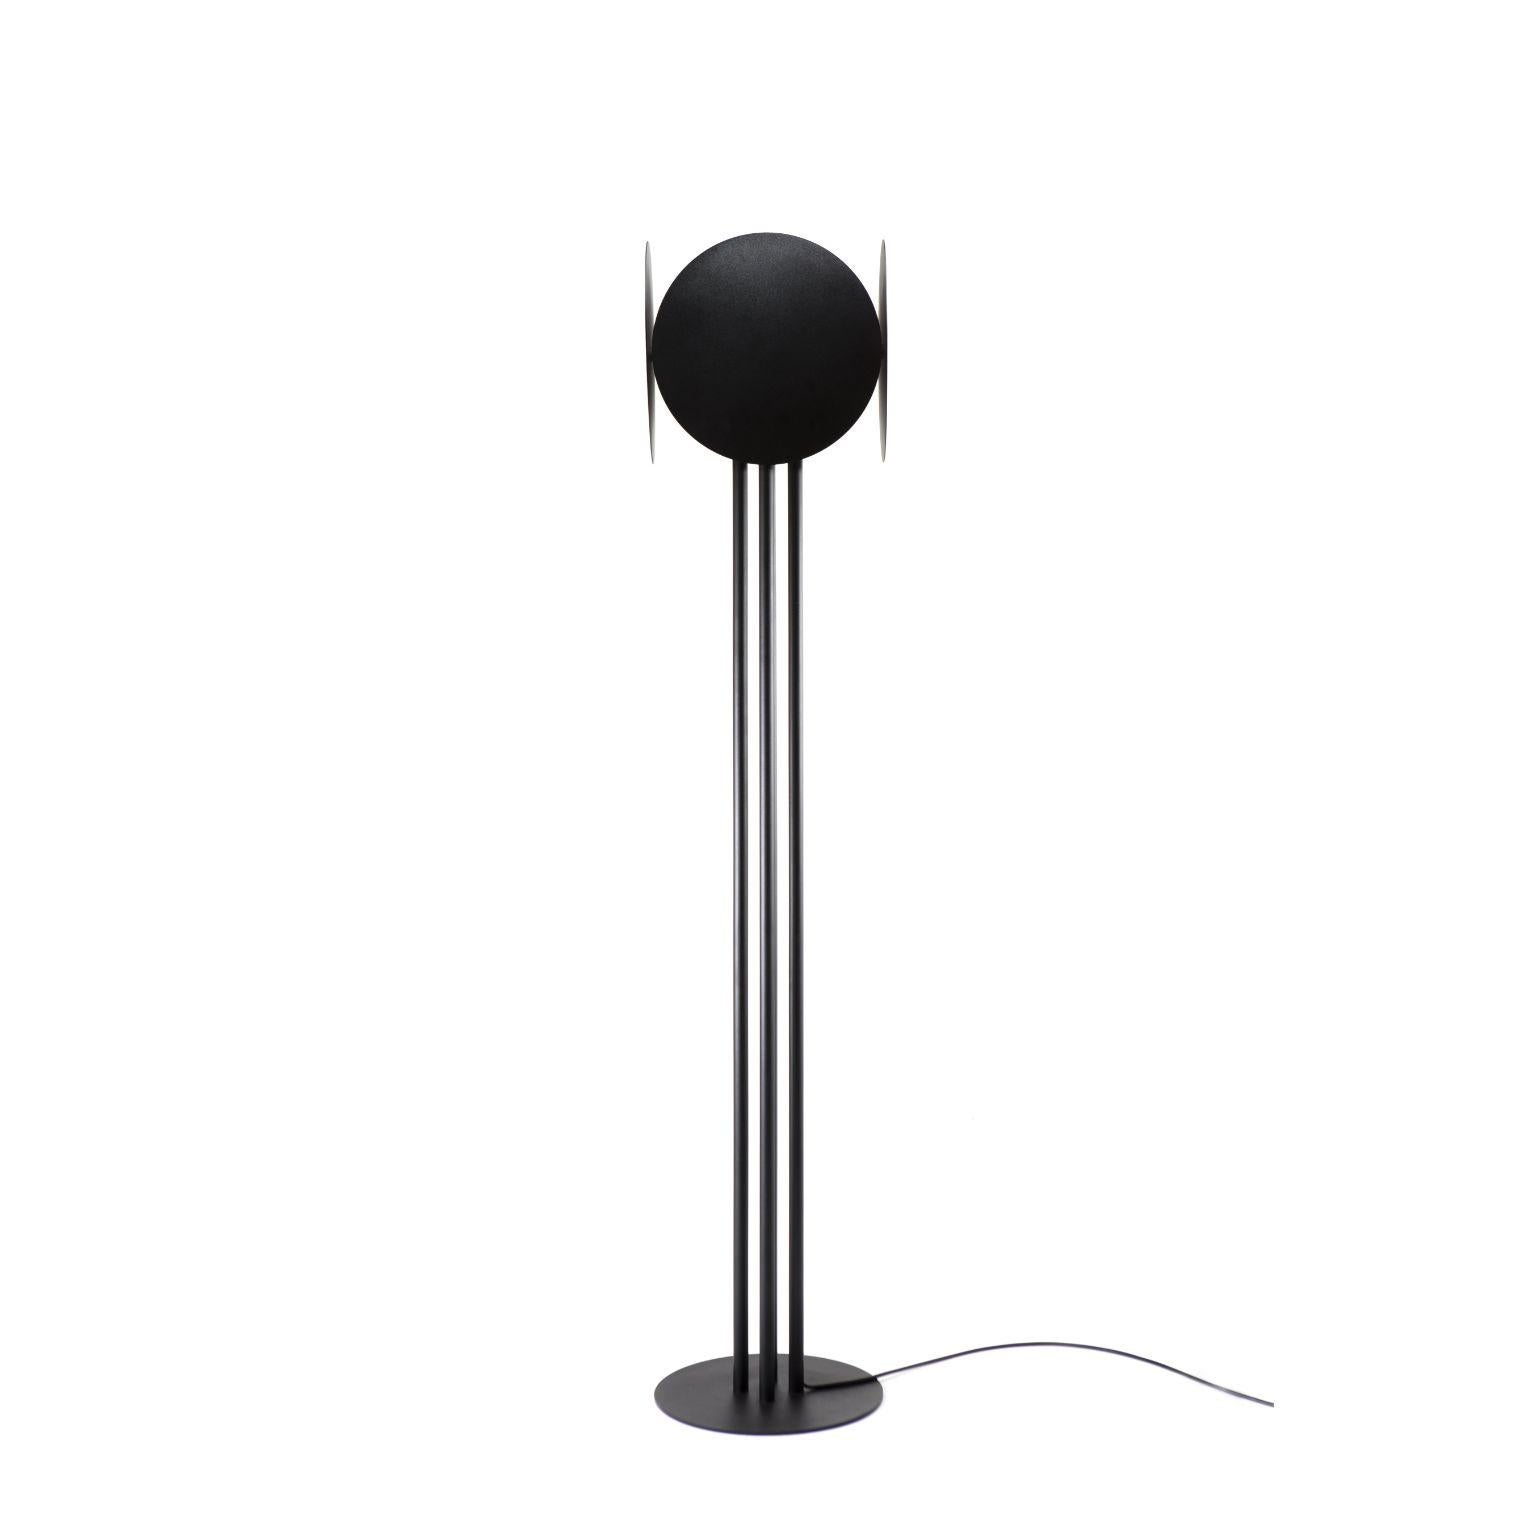 Dureza - Floor lamp by Cultivado Em Casa
Dimensions: 34 x 34 x 170 cm
Materials: Carbon steel and electrostatic painting.

All our lamps can be wired according to each country. If sold to the USA it will be wired for the USA for instance.

The